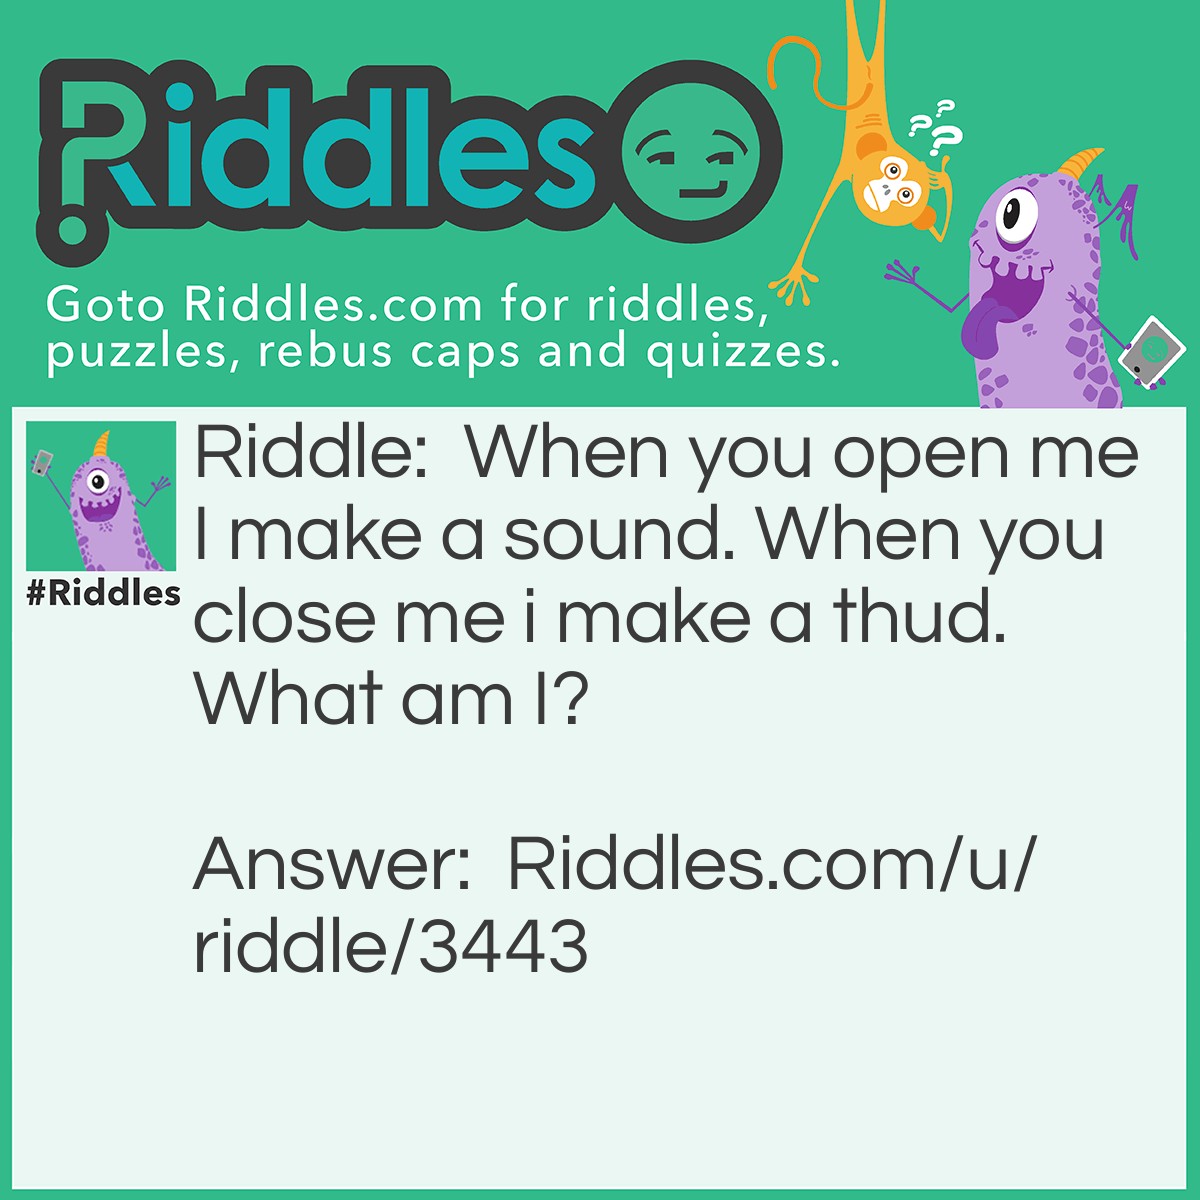 Riddle: When you open me I make a sound. When you close me i make a thud. What am I? Answer: A door!